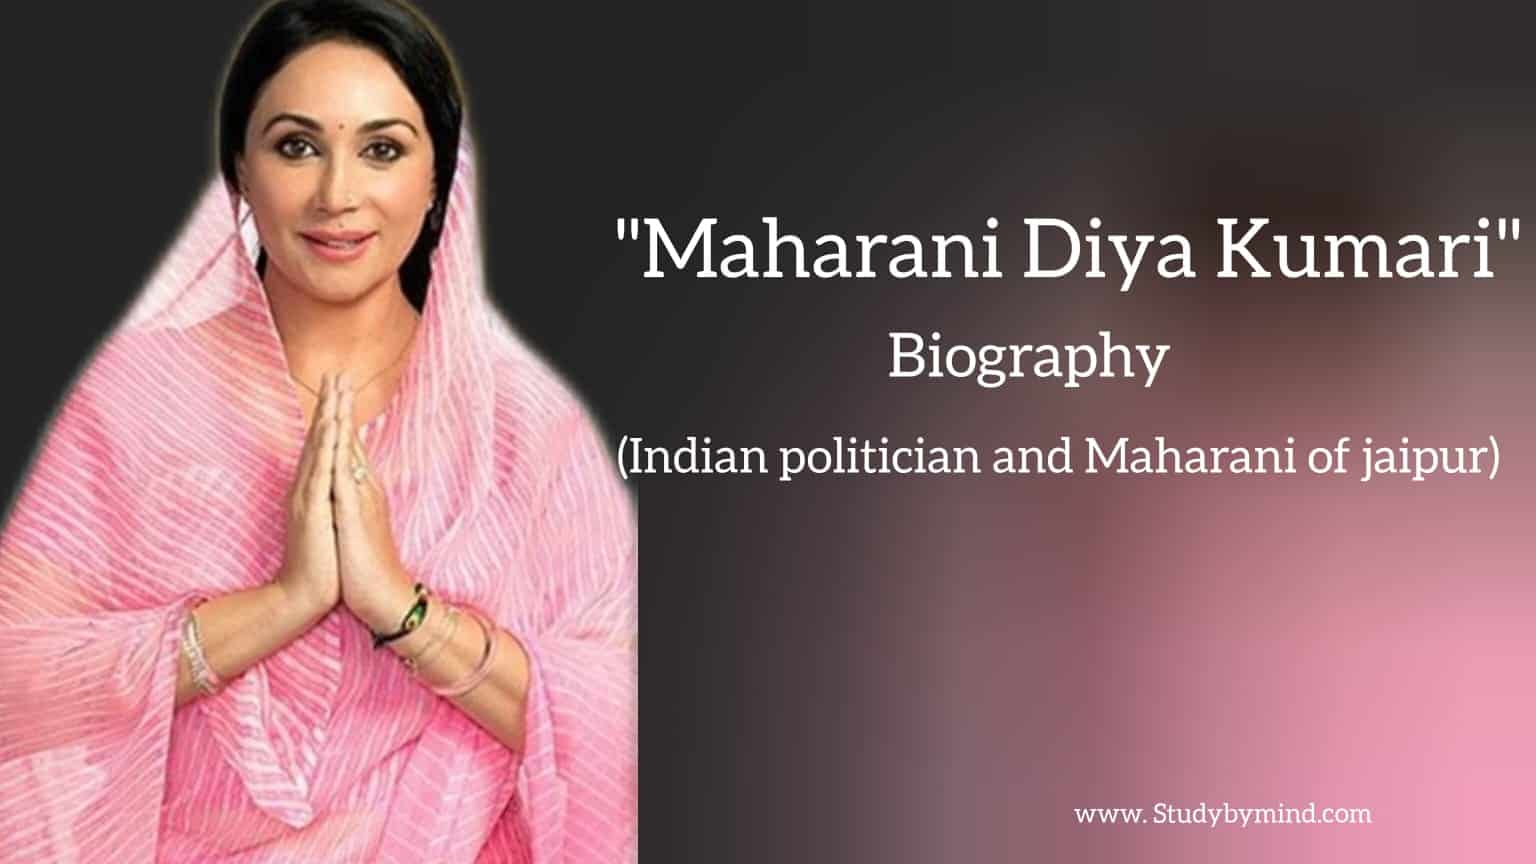 You are currently viewing Diya Kumari biography in english (Indian politician and Queen of Jaipur)